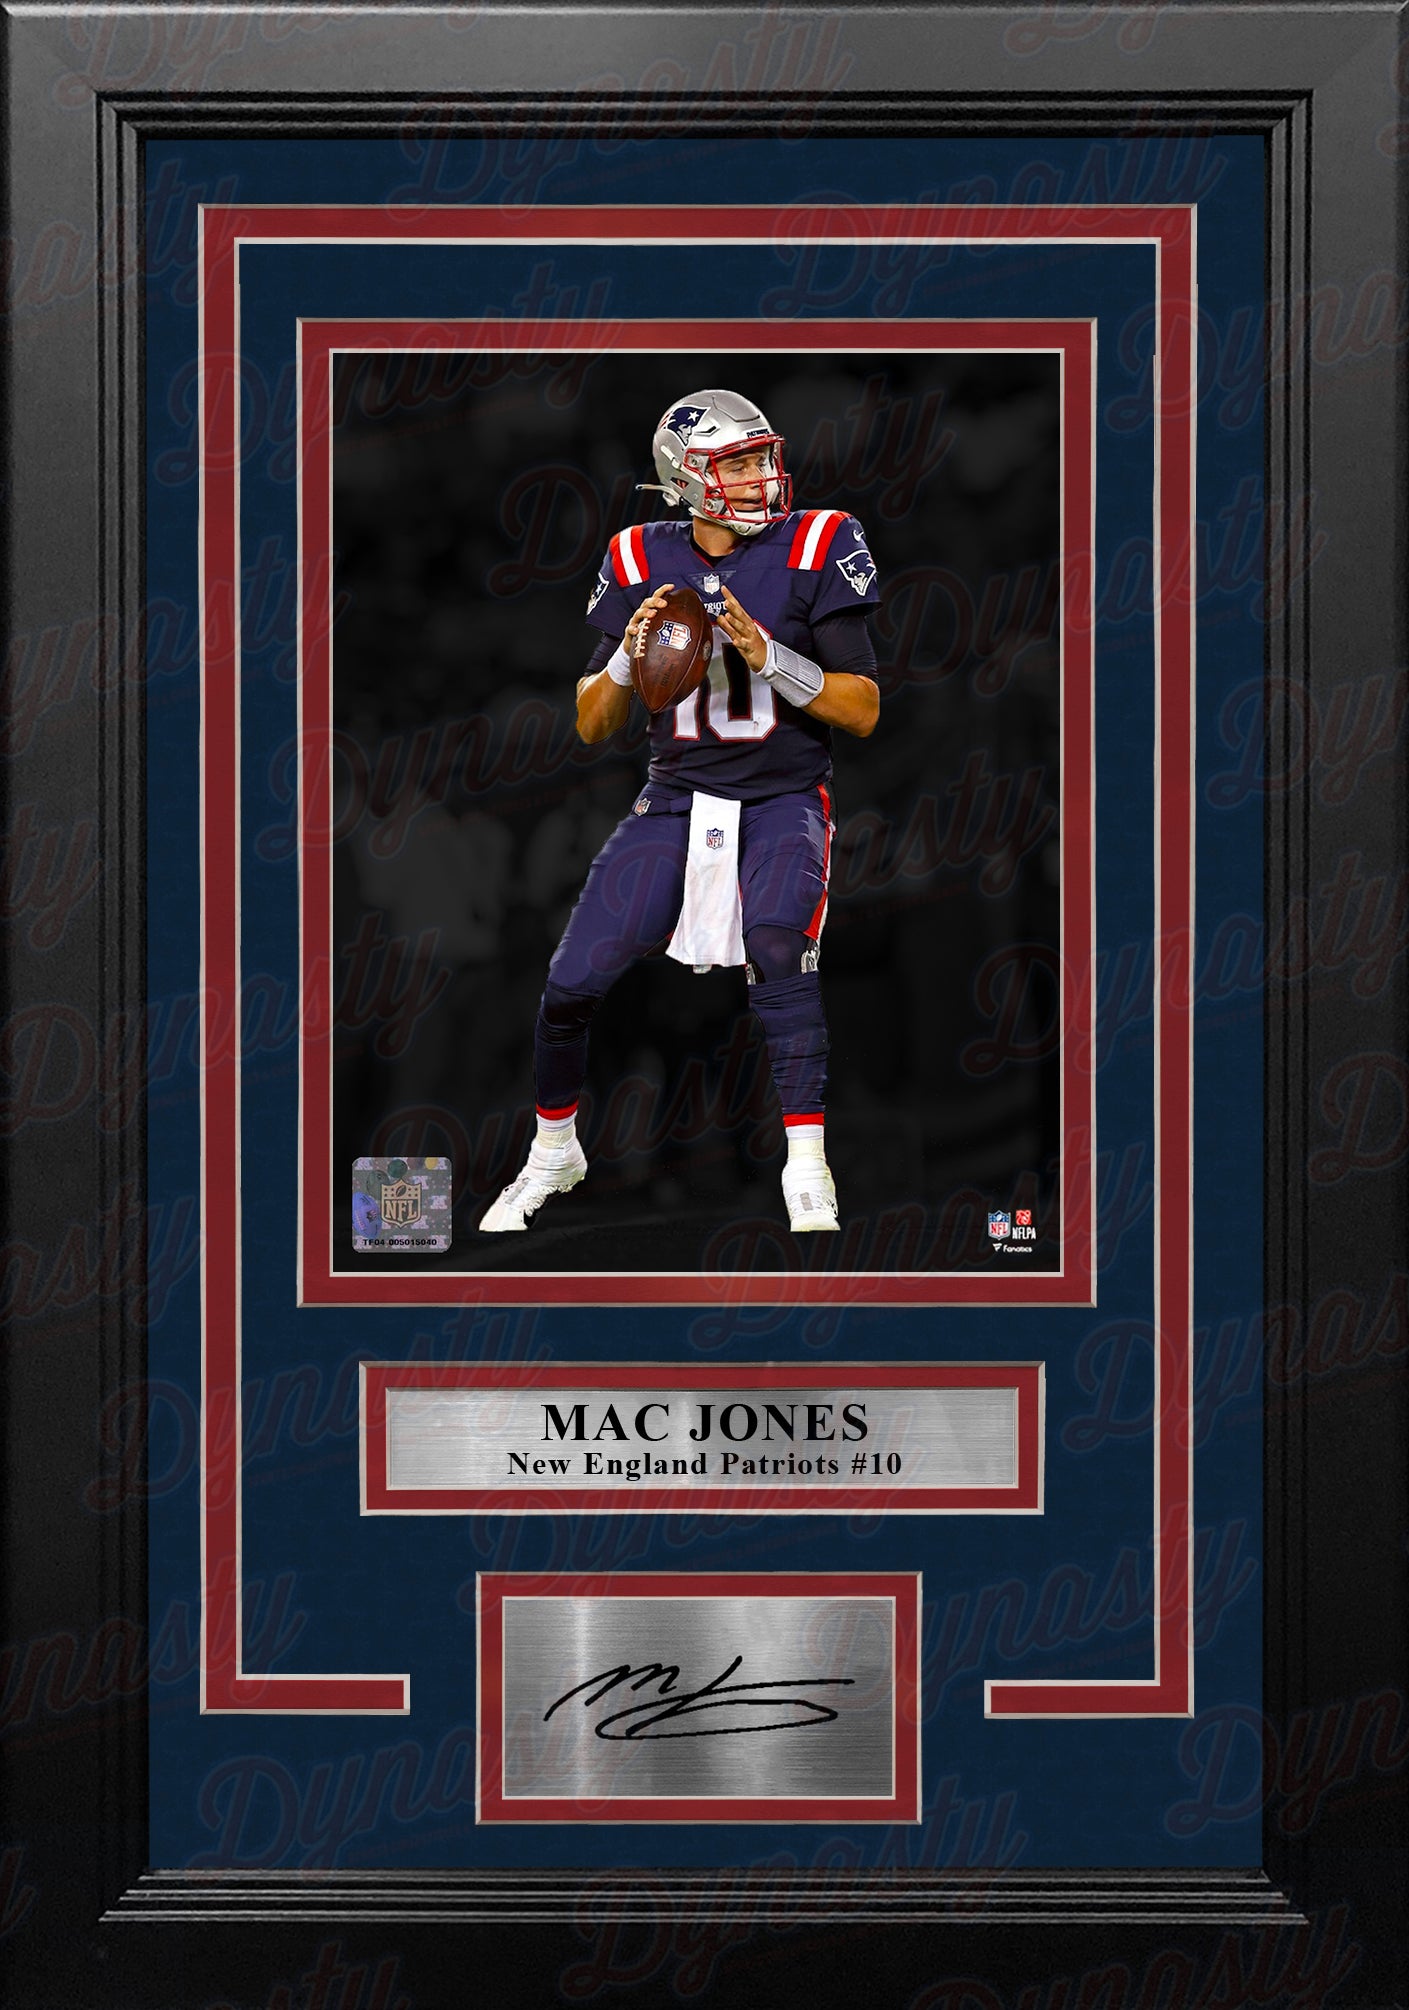 Mac Jones Blackout Action New England Patriots 8" x 10" Framed Football Photo with Engraved Autograph - Dynasty Sports & Framing 